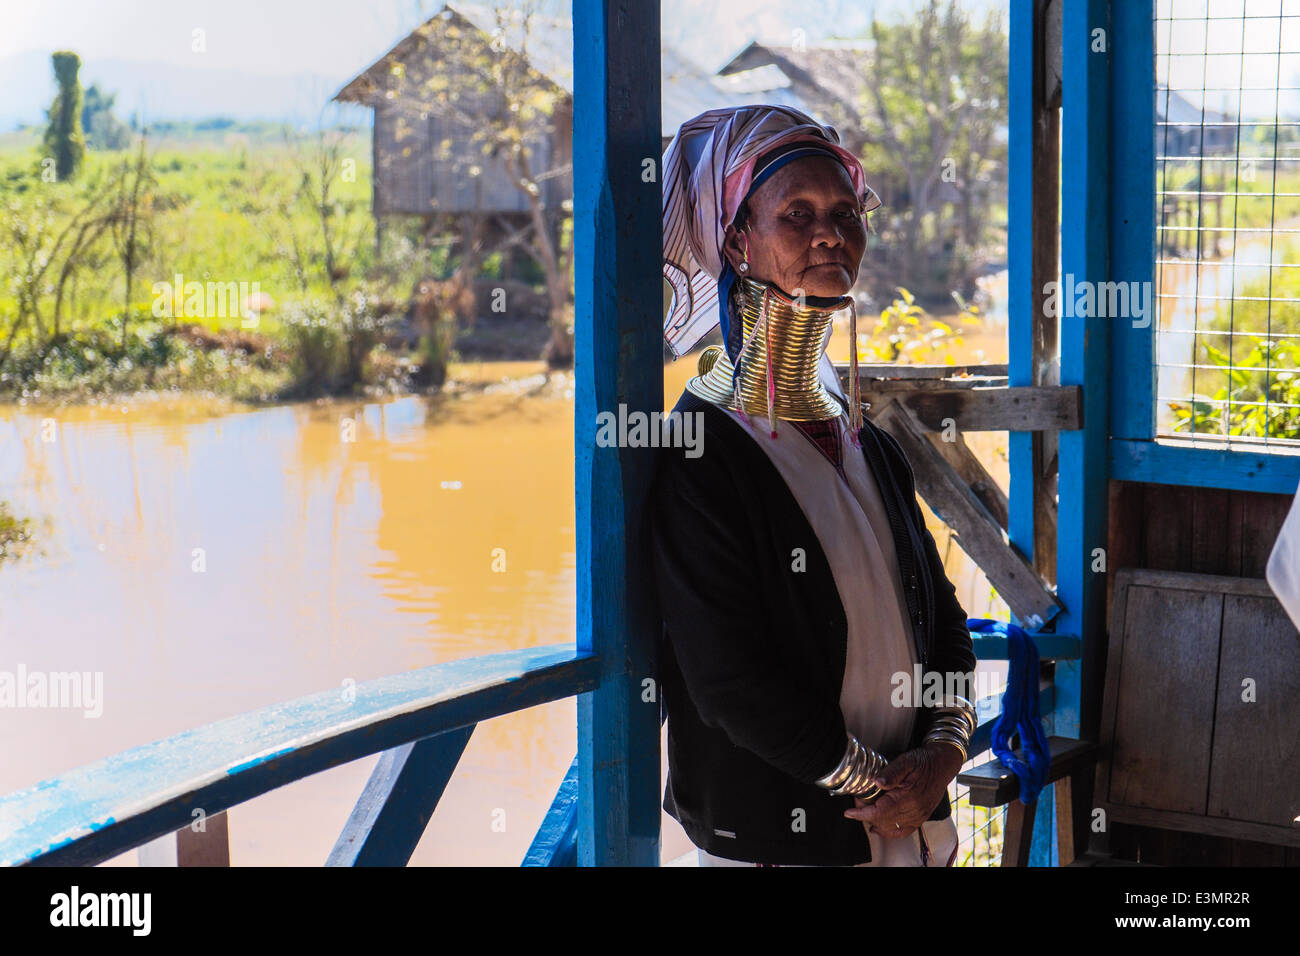 So-called Giraffe Woman as tourist attraction in village at Inle Lake, Myanmar, Asia Stock Photo